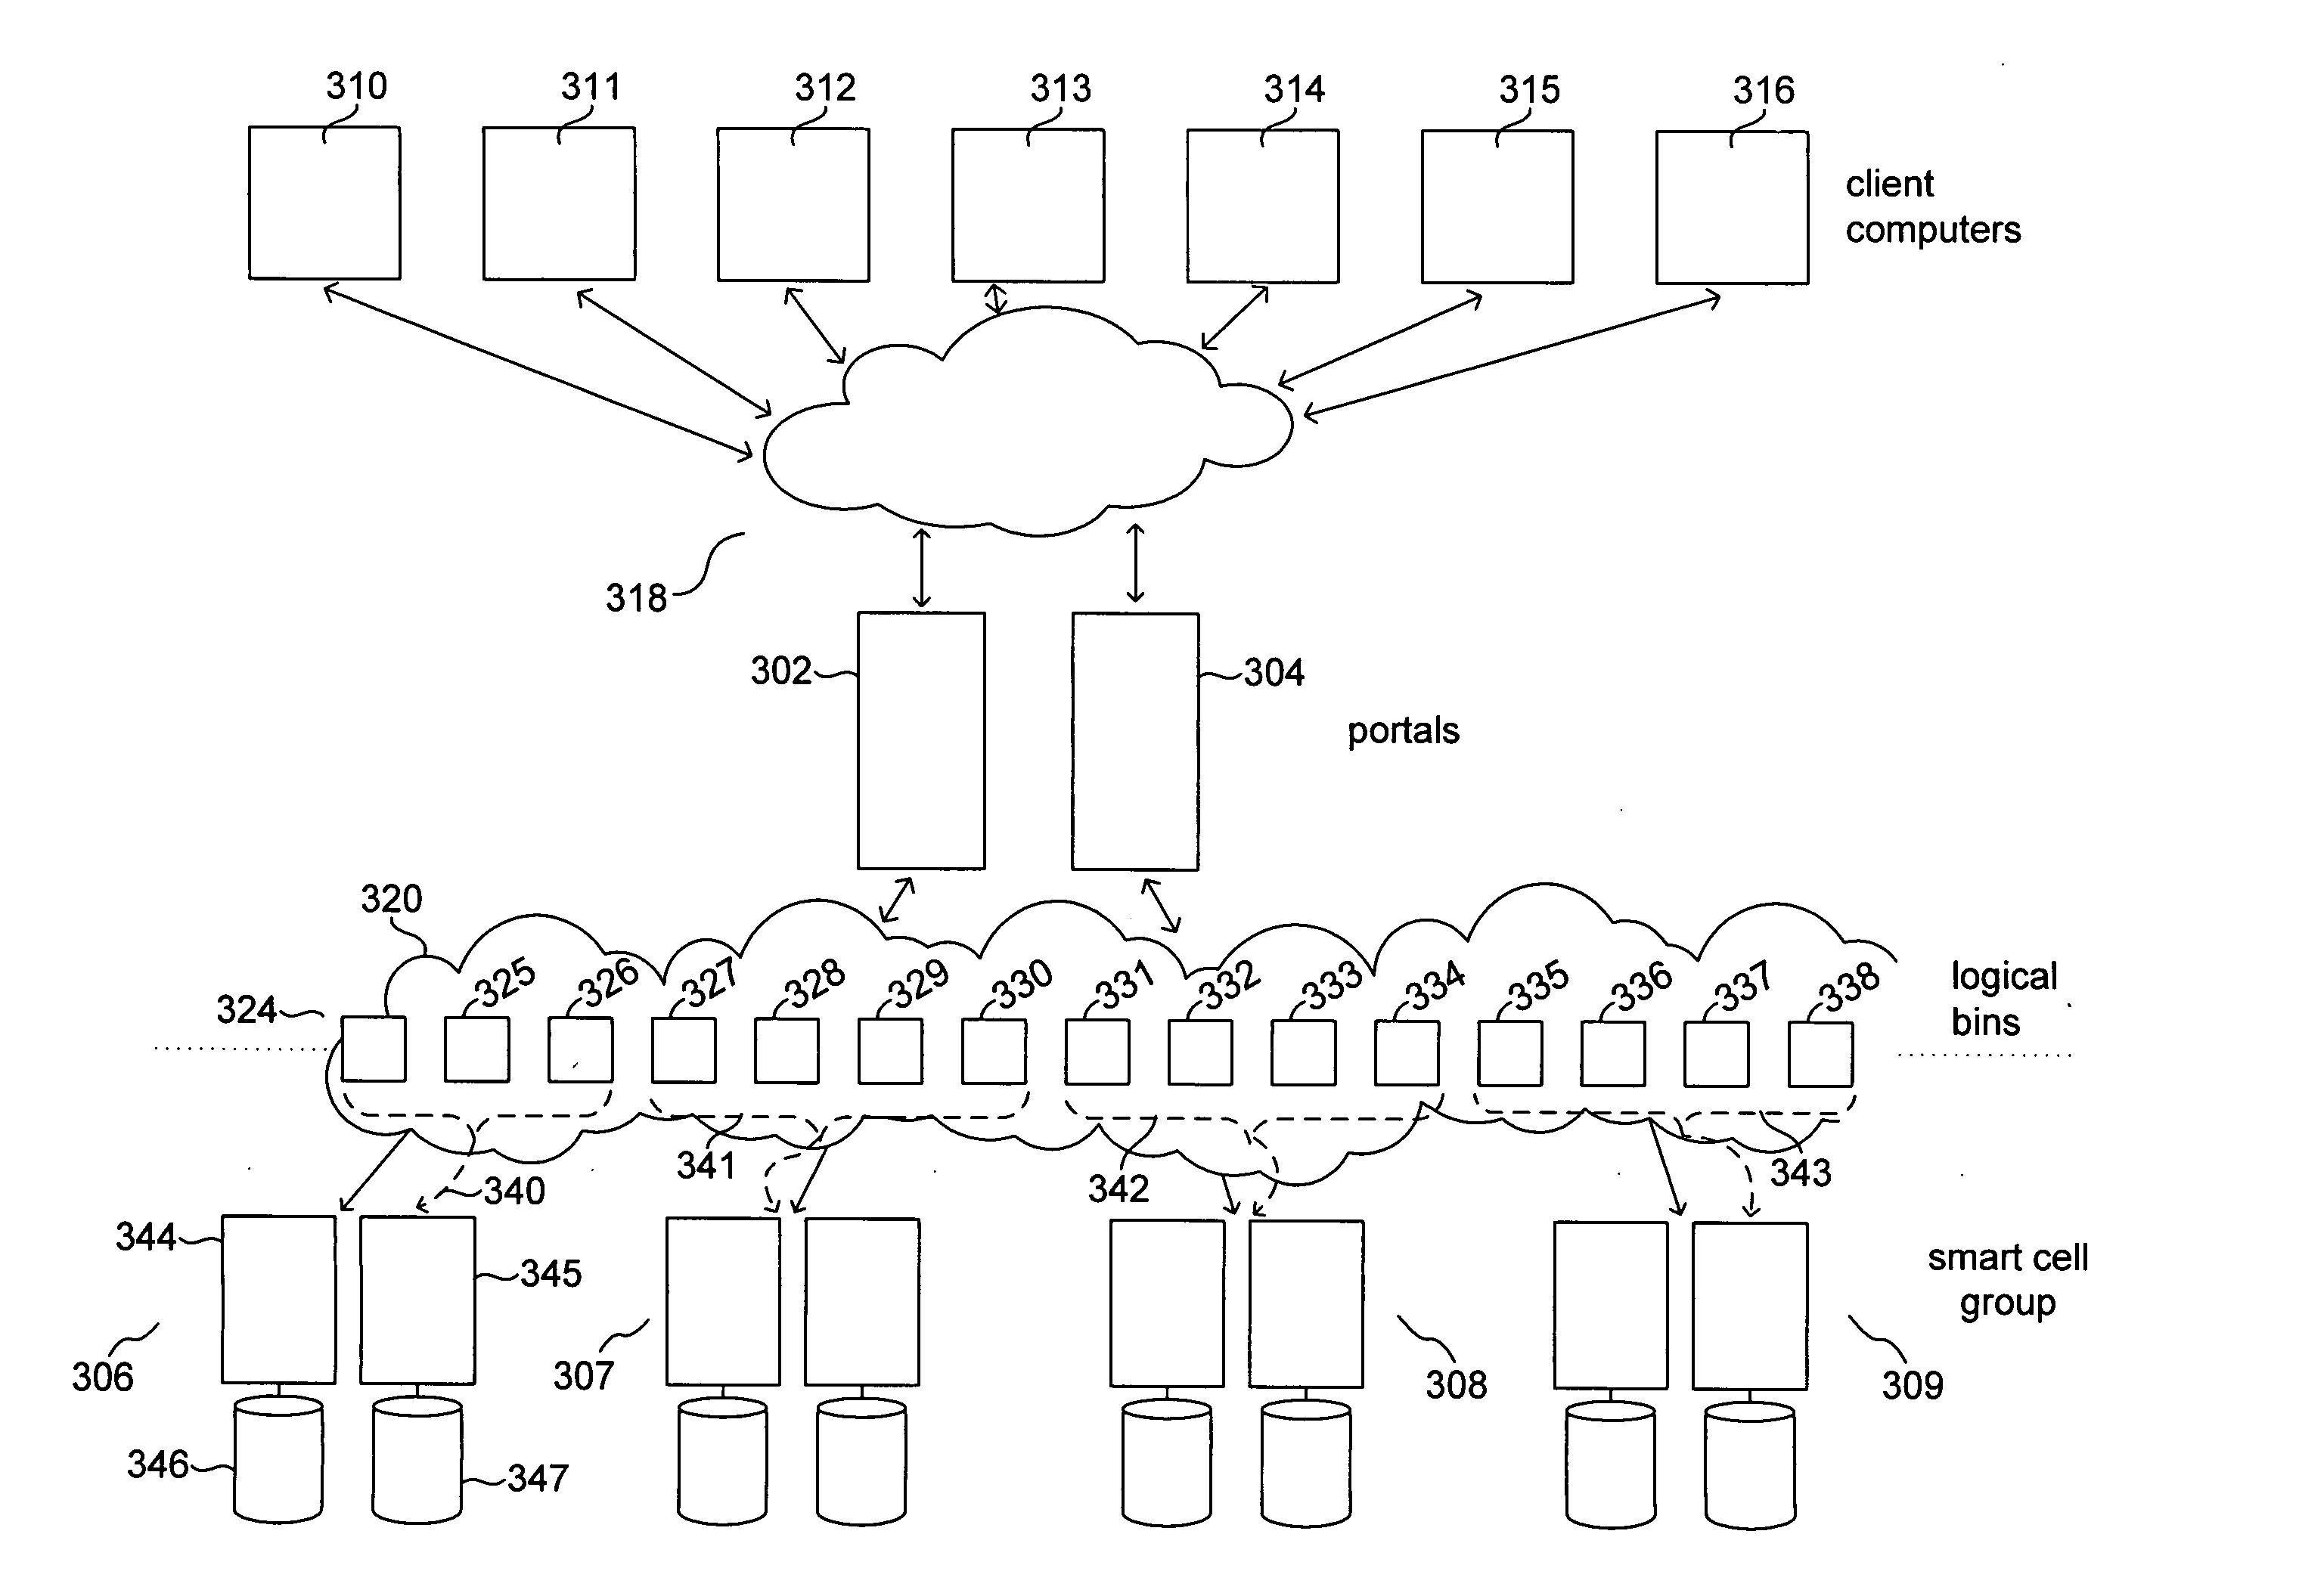 Method and system for scaleable, distributed, differential electronic-data backup and archiving